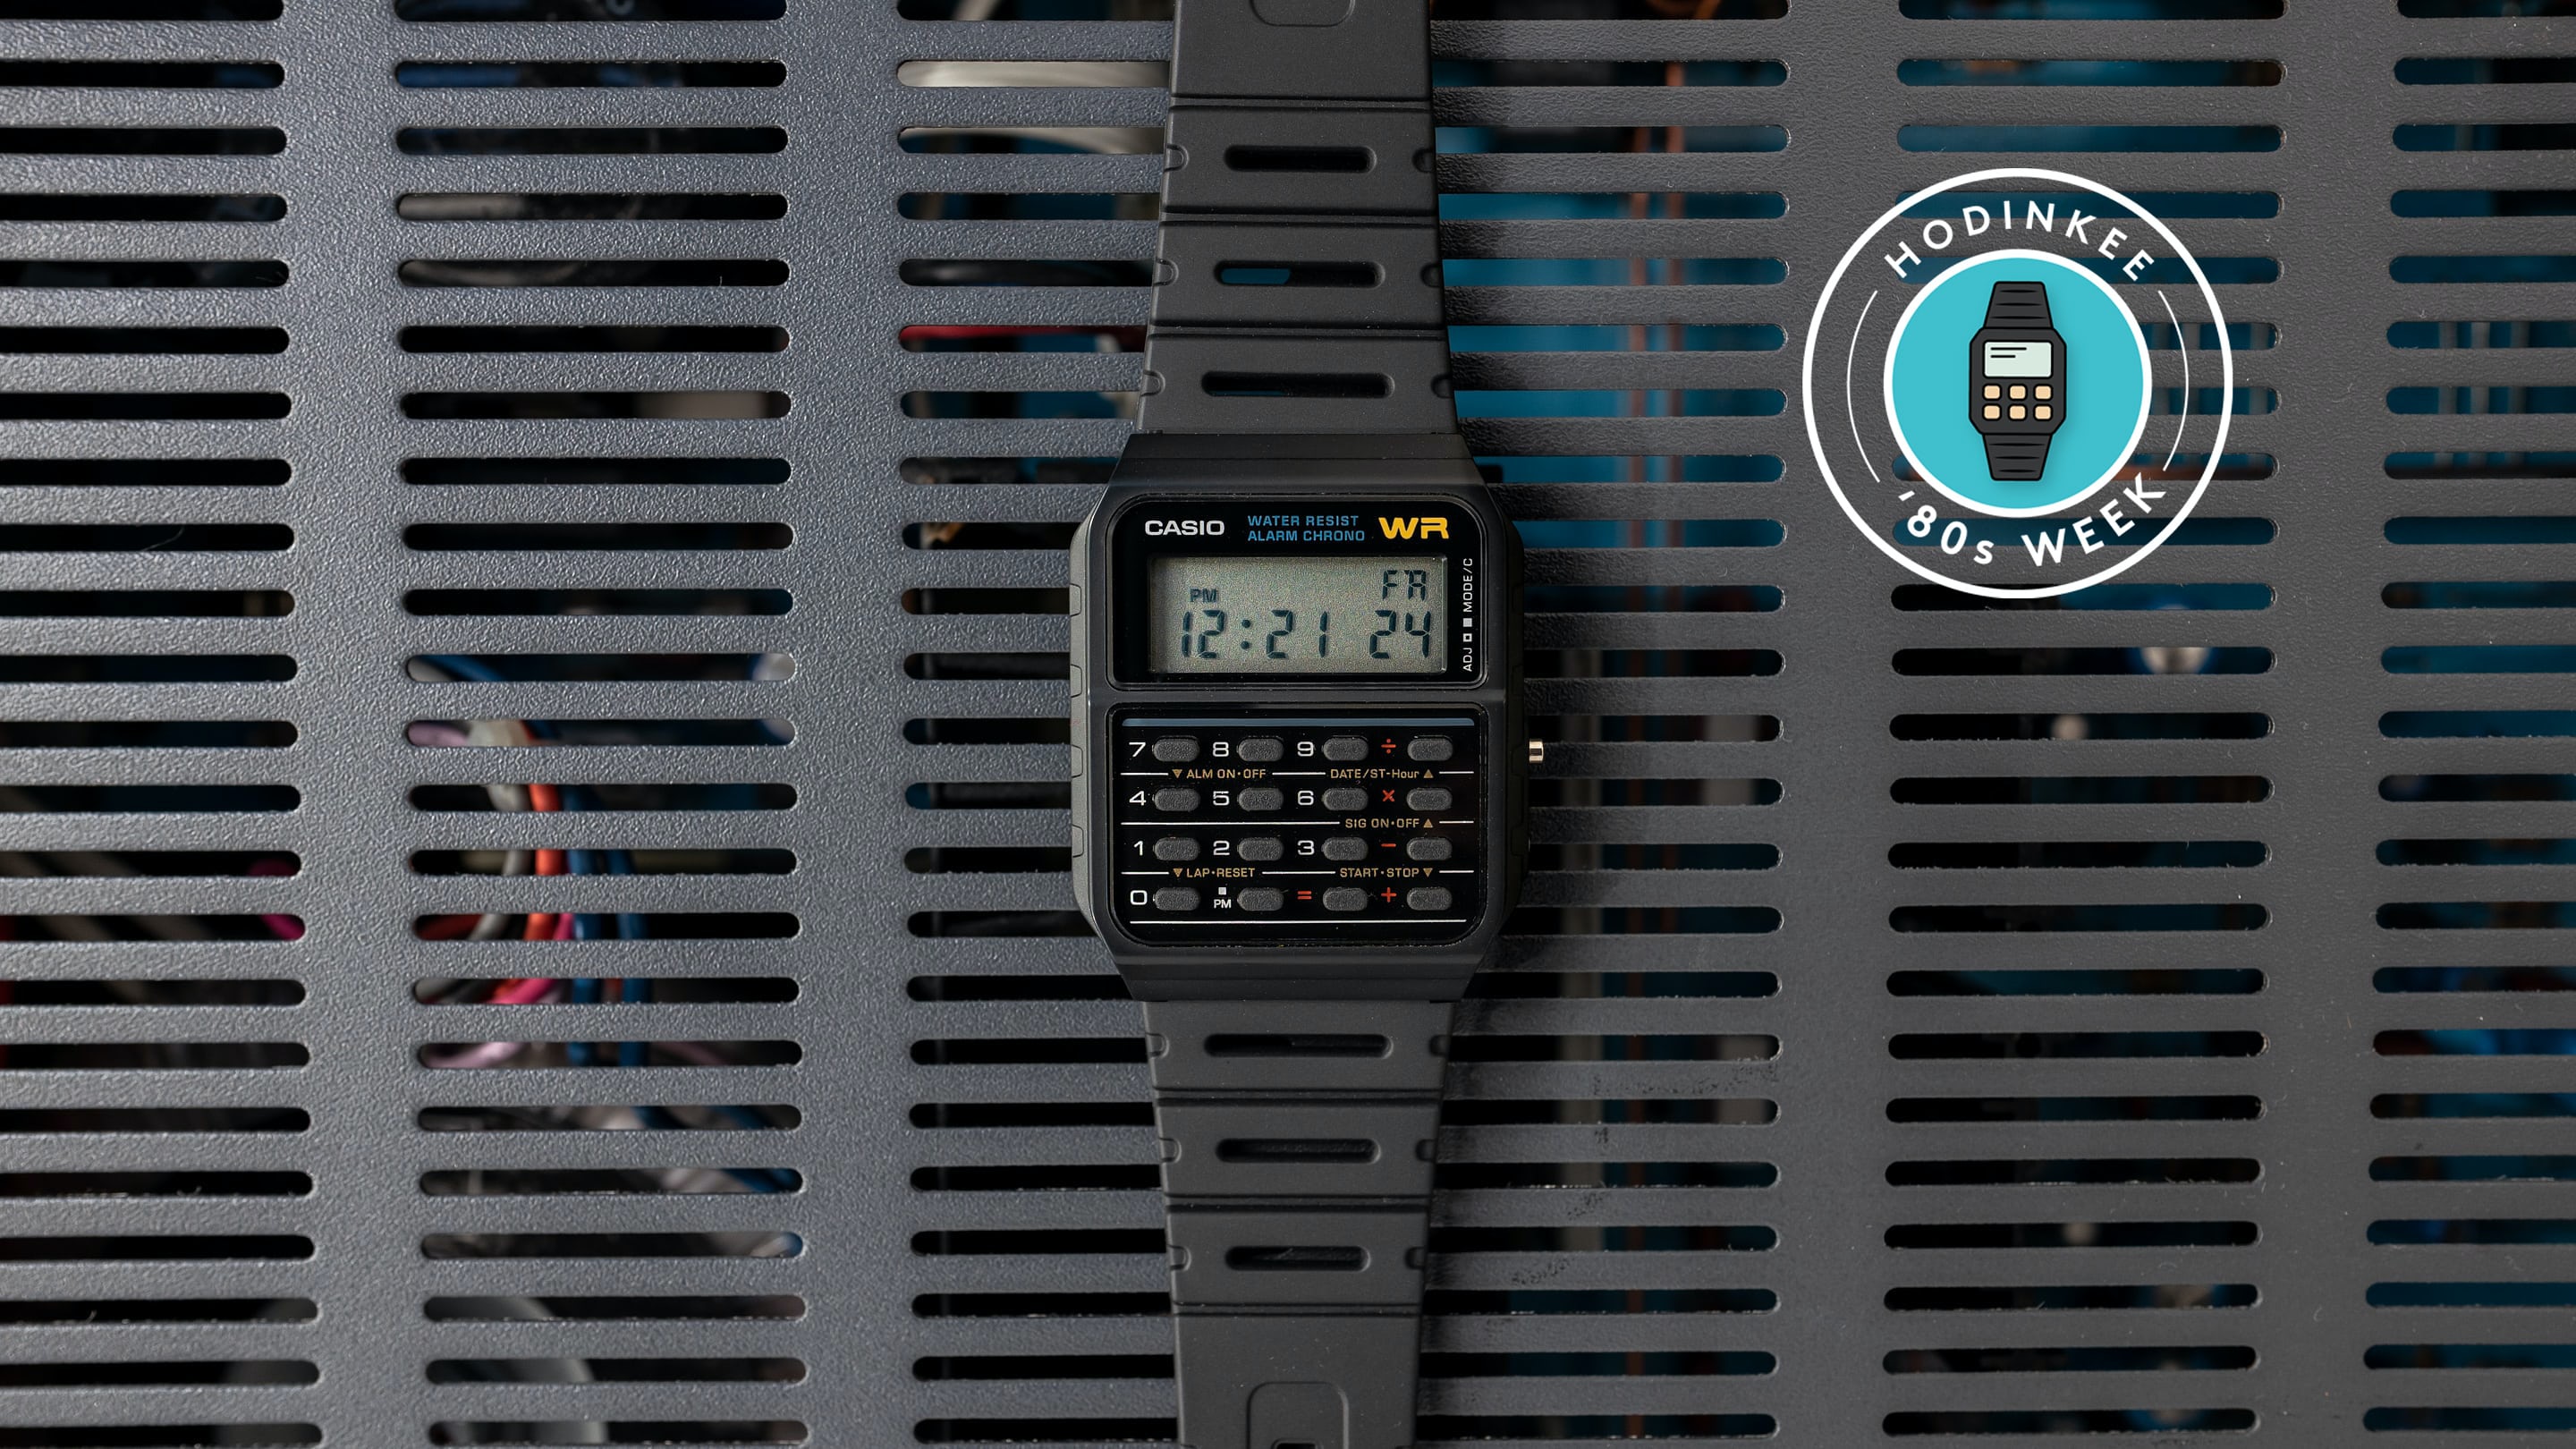 Casio Calculator Watches Are Pre-Apple 1980s Still On Today - Bloomberg